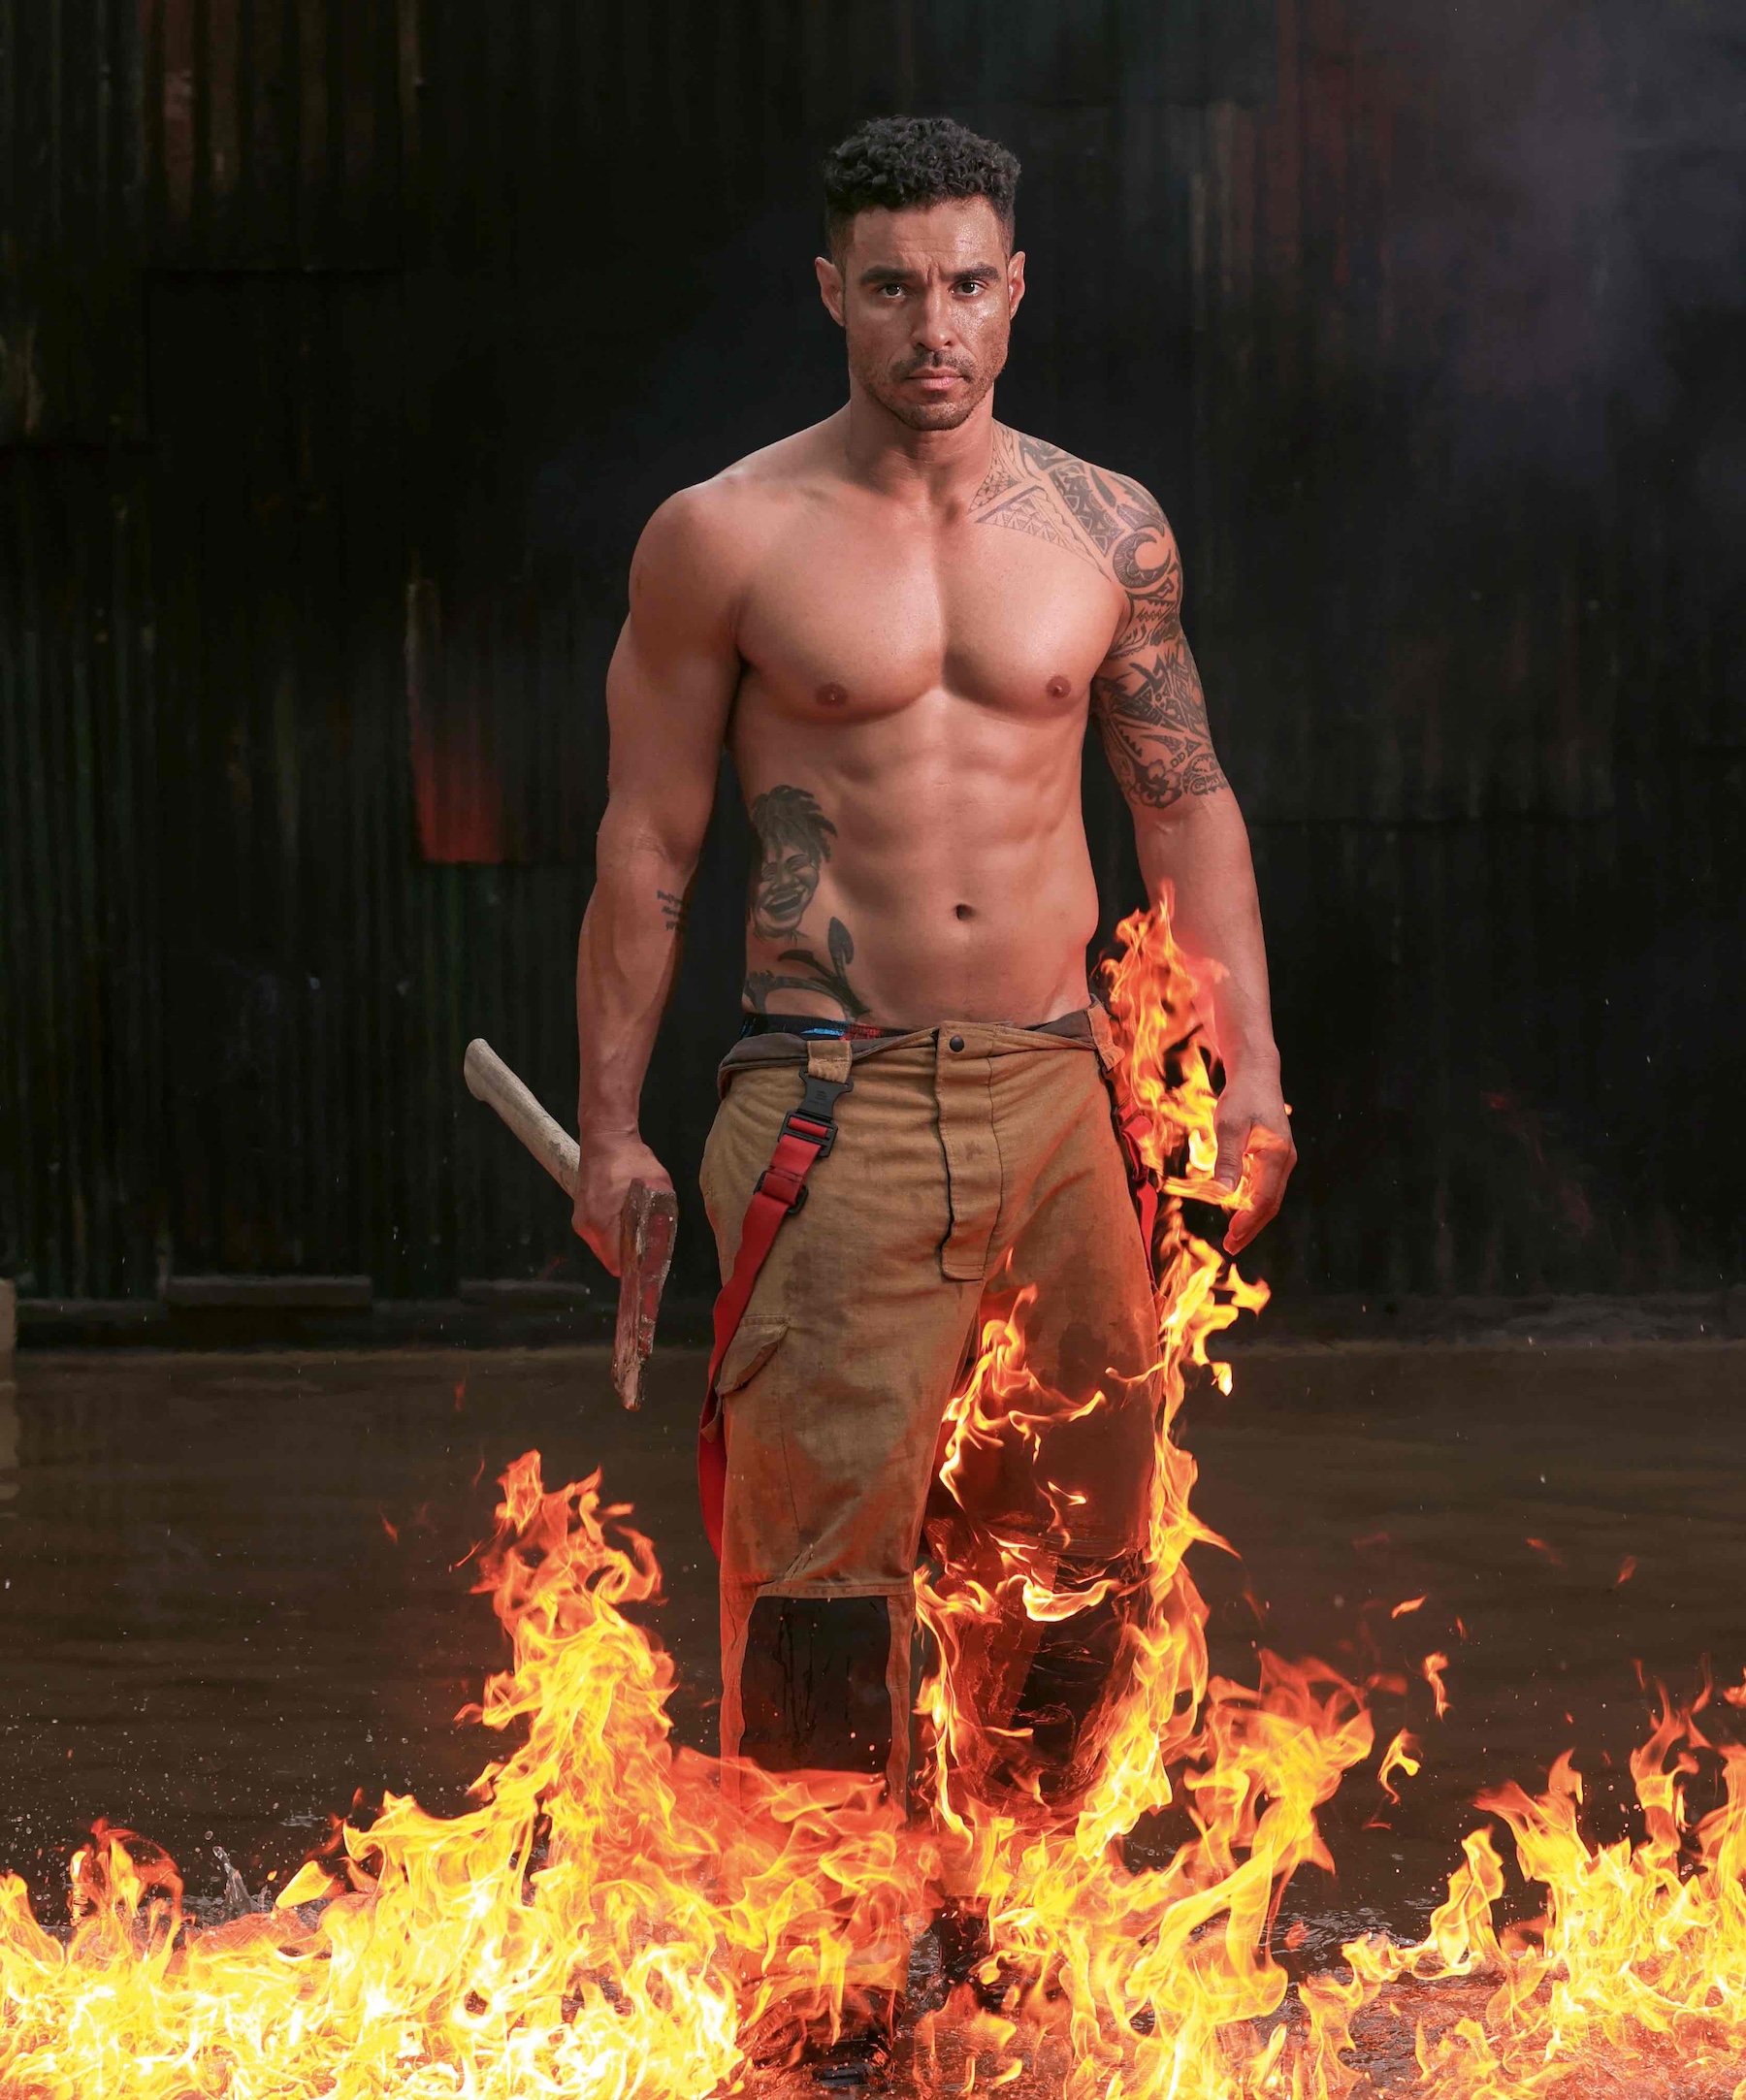 Australian Firefighters Have Posed For Their Annual Charity Calendar And It’s Literally Too Hot To Handle